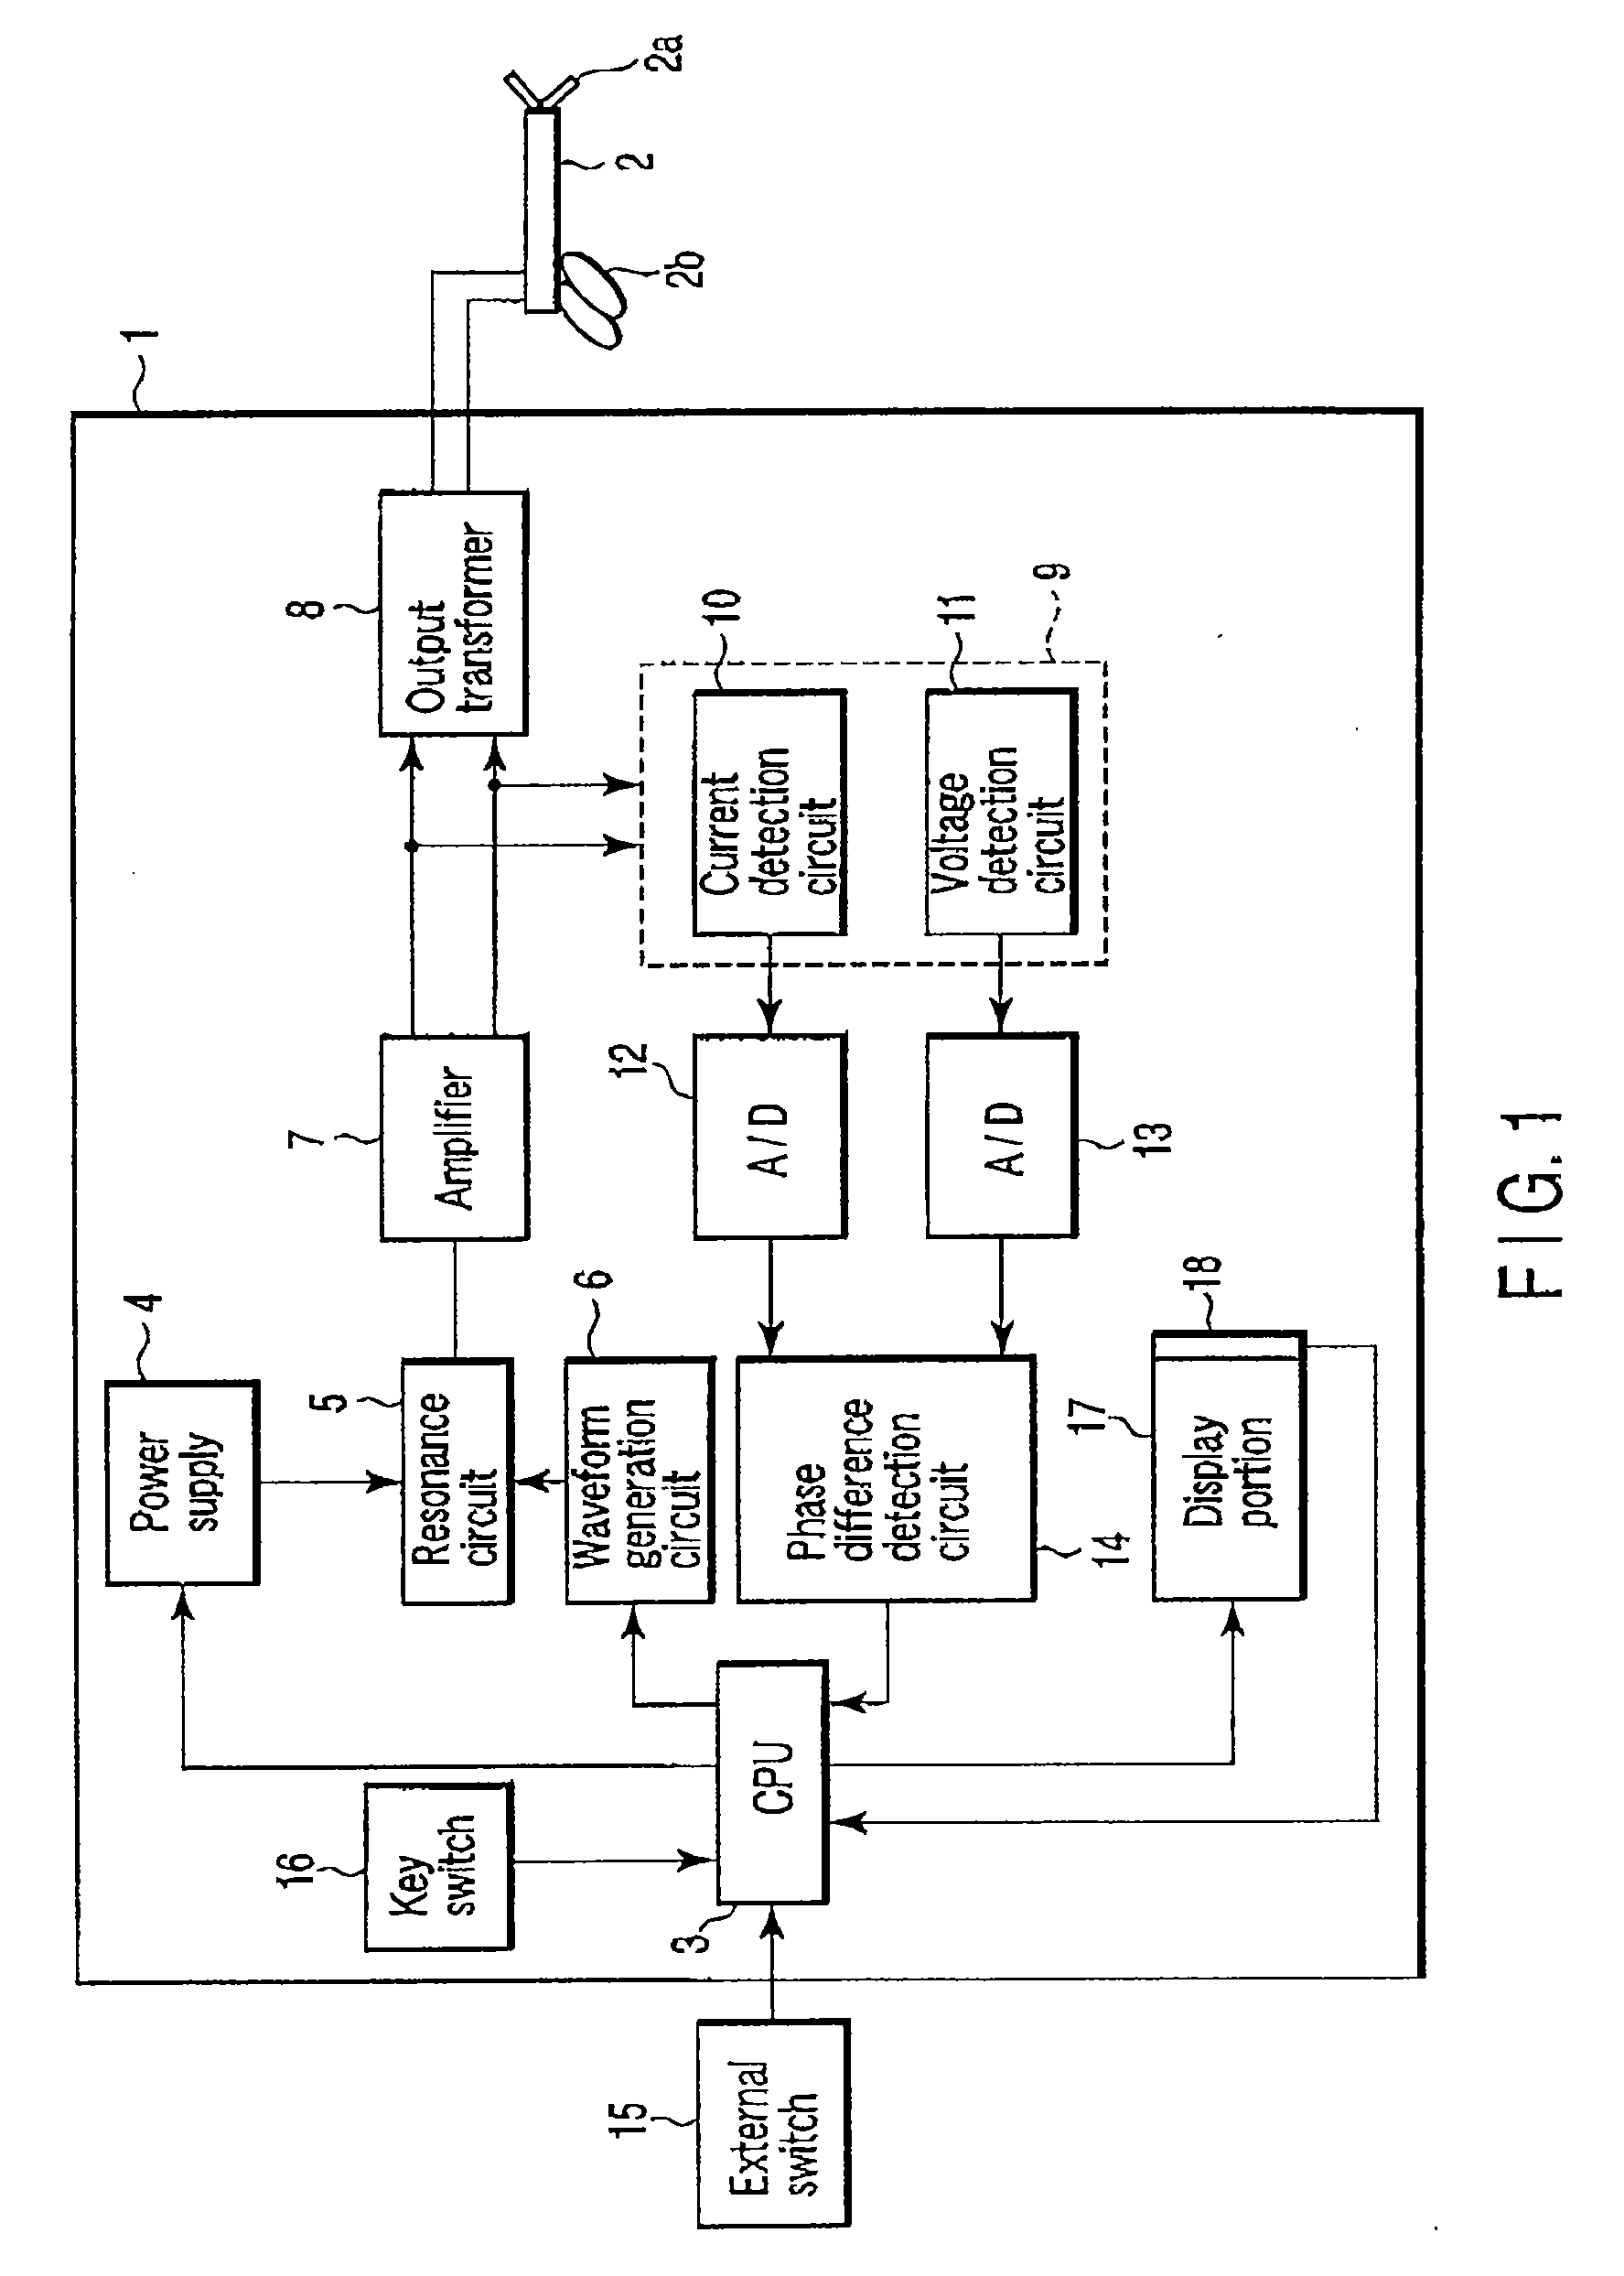 Electric processing system